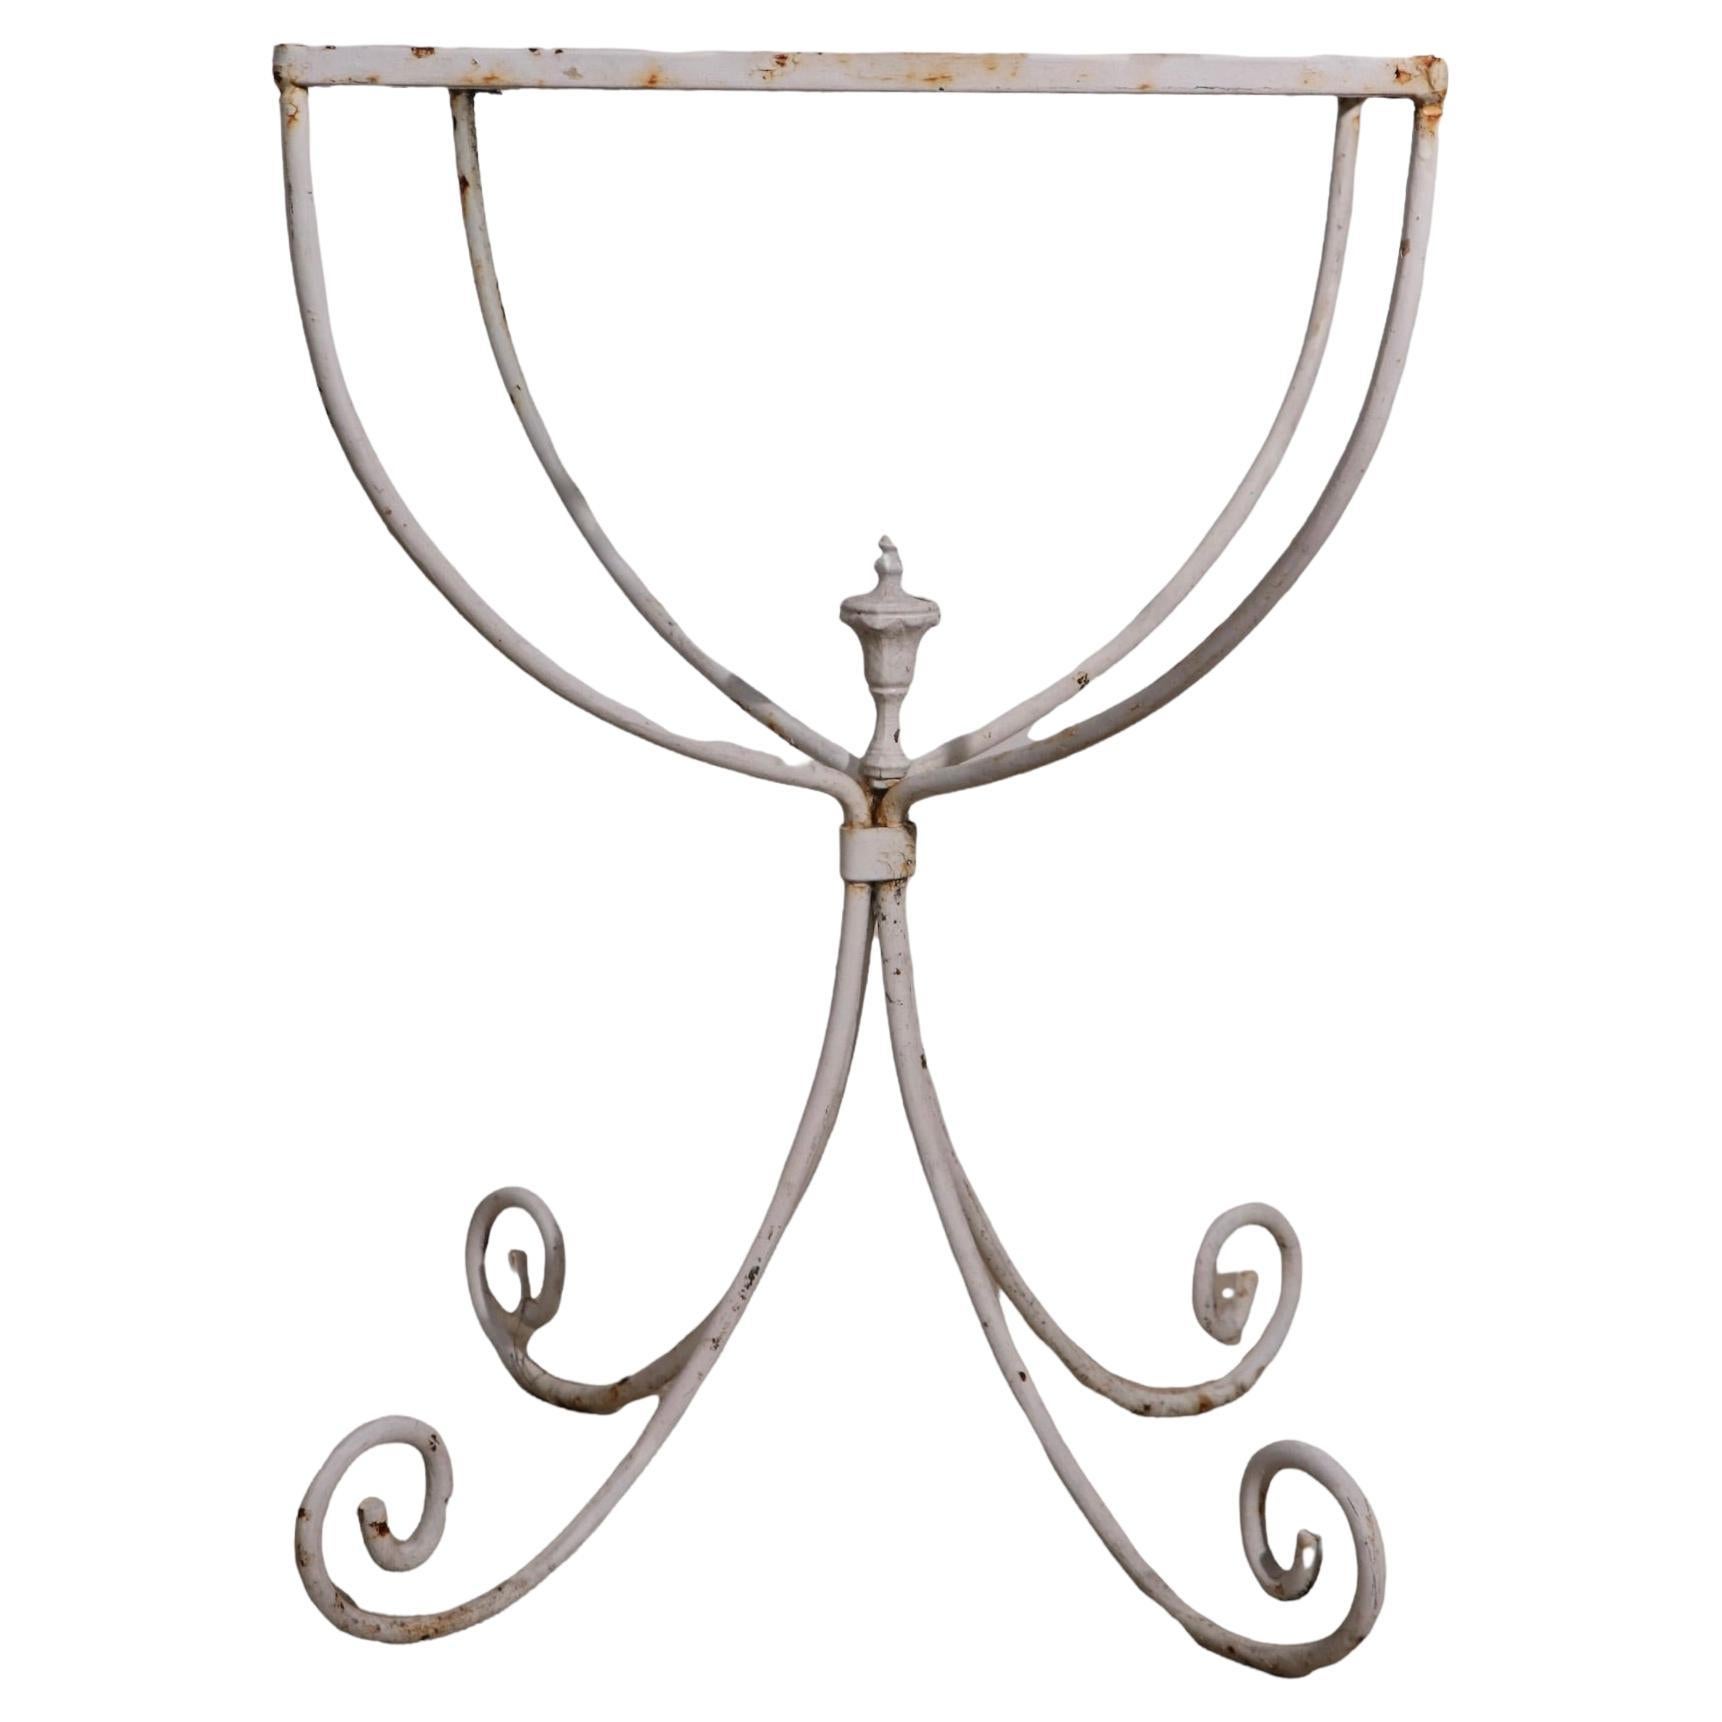 Charming diminutive side, or end table of Romantic and Classical form. The table features a U shaped body which supports the original glass top, on scrolling curlicue feet, with a center urn finish as an added decorative touch. This delightful stand